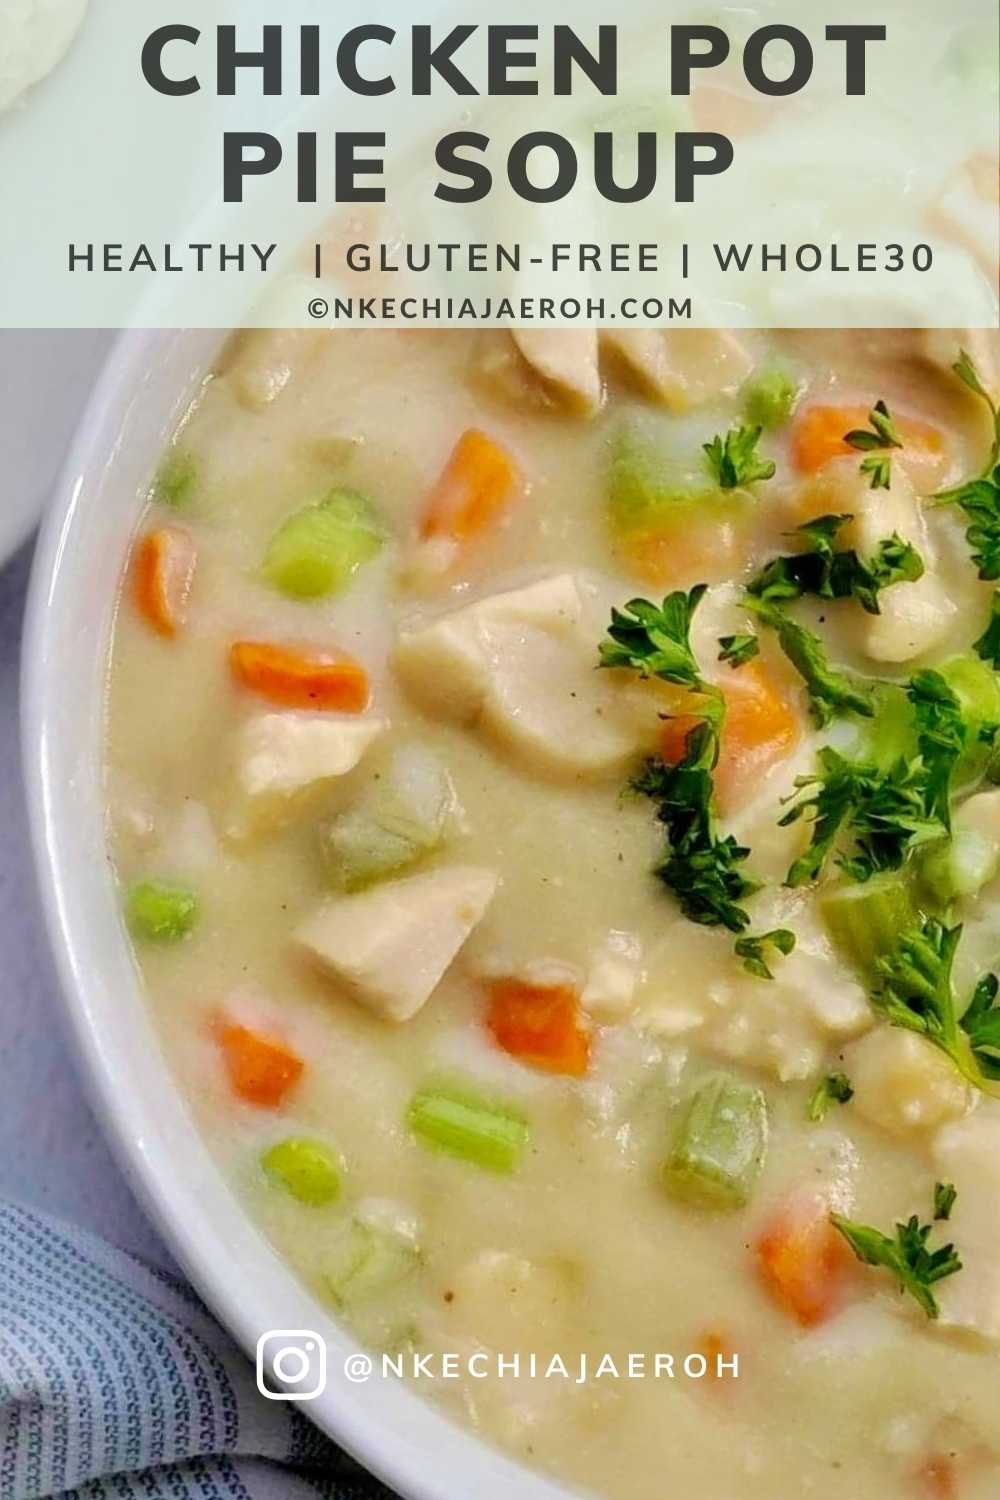 A perfect healthy chicken pot pie soup that is creamy, cozy, comforting, hearty, and very satisfying; this soup is gluten-free, dairy-free, nut-free, paleo-friendly, low-carb, and whole30-friendly. Serve this chicken pot pie soup with biscuits as we did, or crackers if you wish. This easy-to-make heart-healthy pot pie soup will keep you satisfied and wanting more at the same time! #Chickenrecipe #chickenpotpiesoup #Glutenfreerecipe #Dairyfreerecipe #Glutenfreechickenpotpiesoup #cauliflowerrecipe